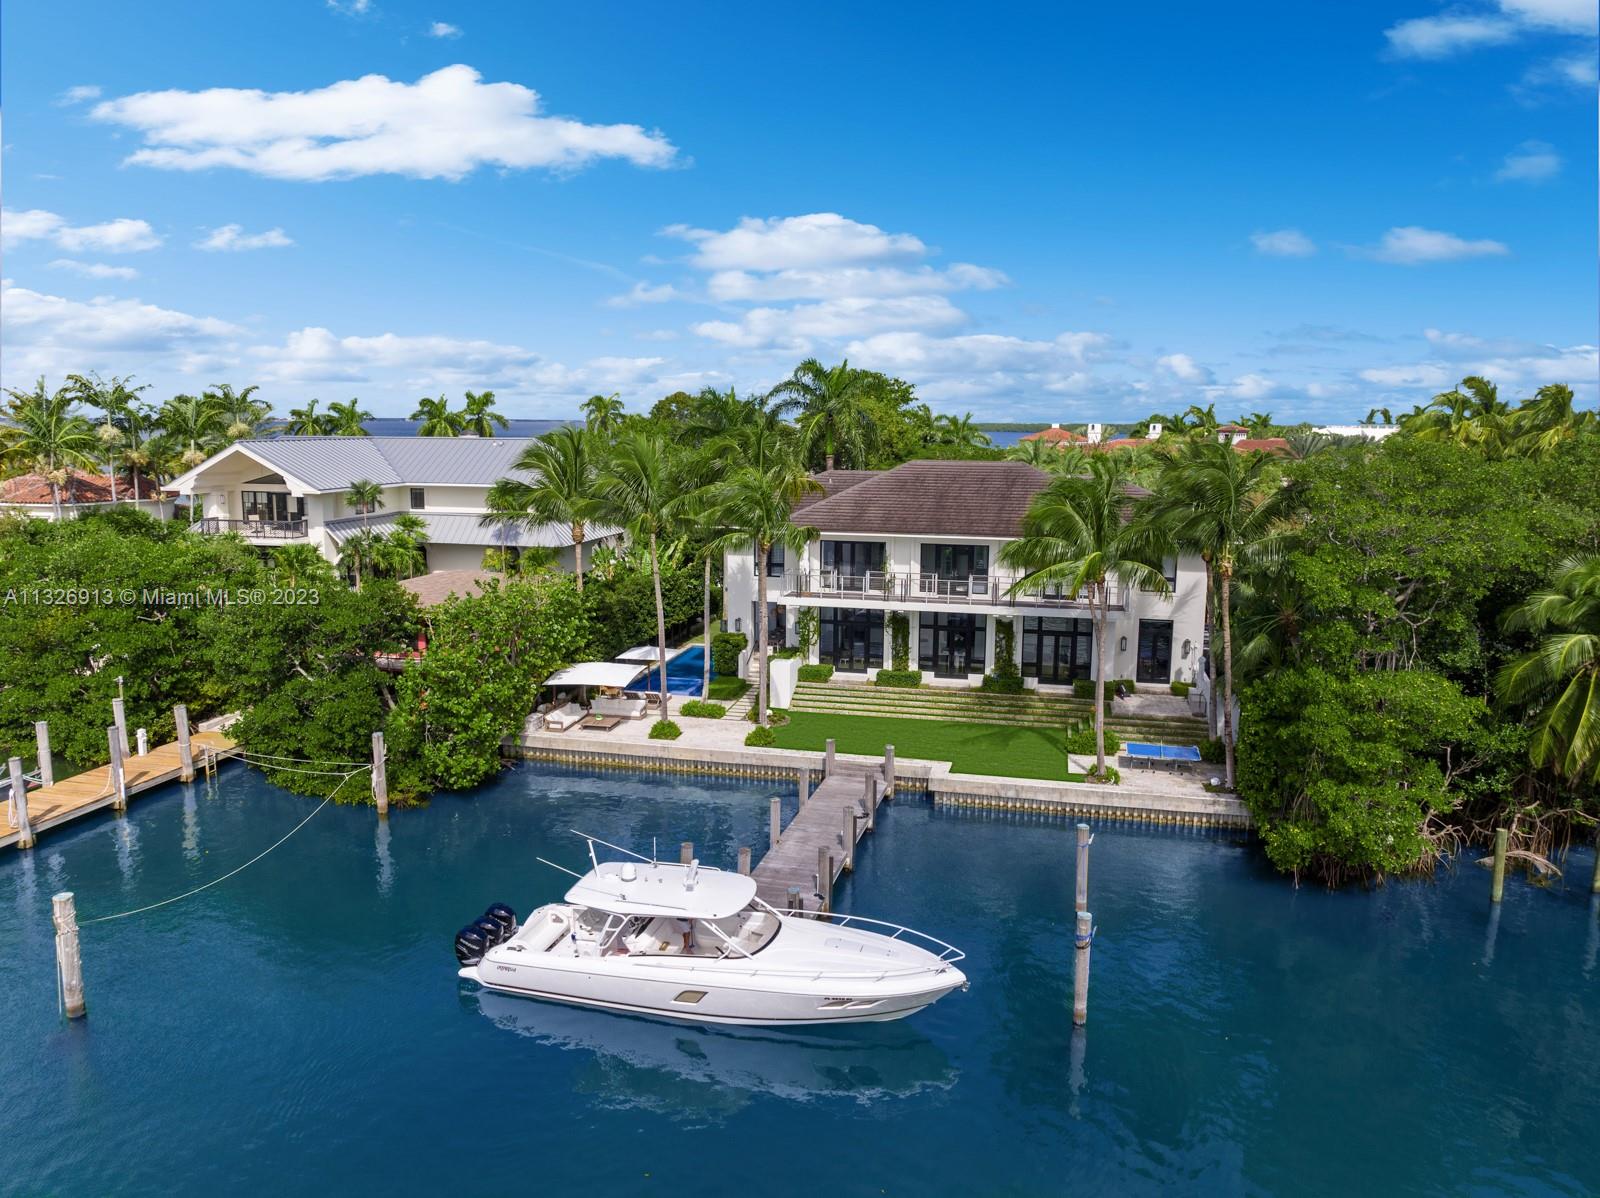 Unique opportunity to purchase an award-winning custom, waterfront home built in 2015 by prestigious architect Jorge Hernandez, with interiors by James Duncan. Located in Smuggler Cove, this ‘smart’ residence boasts expansive water views while being protected from the open ocean elements. A 50’ by 10’ dock will accommodate vessels up to 100 ft. This is one of the finest custom built homes you will ever see! Unparalleled natural light & high ceilings. Custom woodwork, Waterworks hardware, Italian granite, wide plank wooden floors, custom-cut marble in bathrooms, and custom designer lighting. Professionally landscaped exterior, pool w/ Jacuzzi, Loggia w/ outdoor kitchen, Marvin hurricane-grade doors & windows throughout, and full Crestron and Lutron system to complete the home.